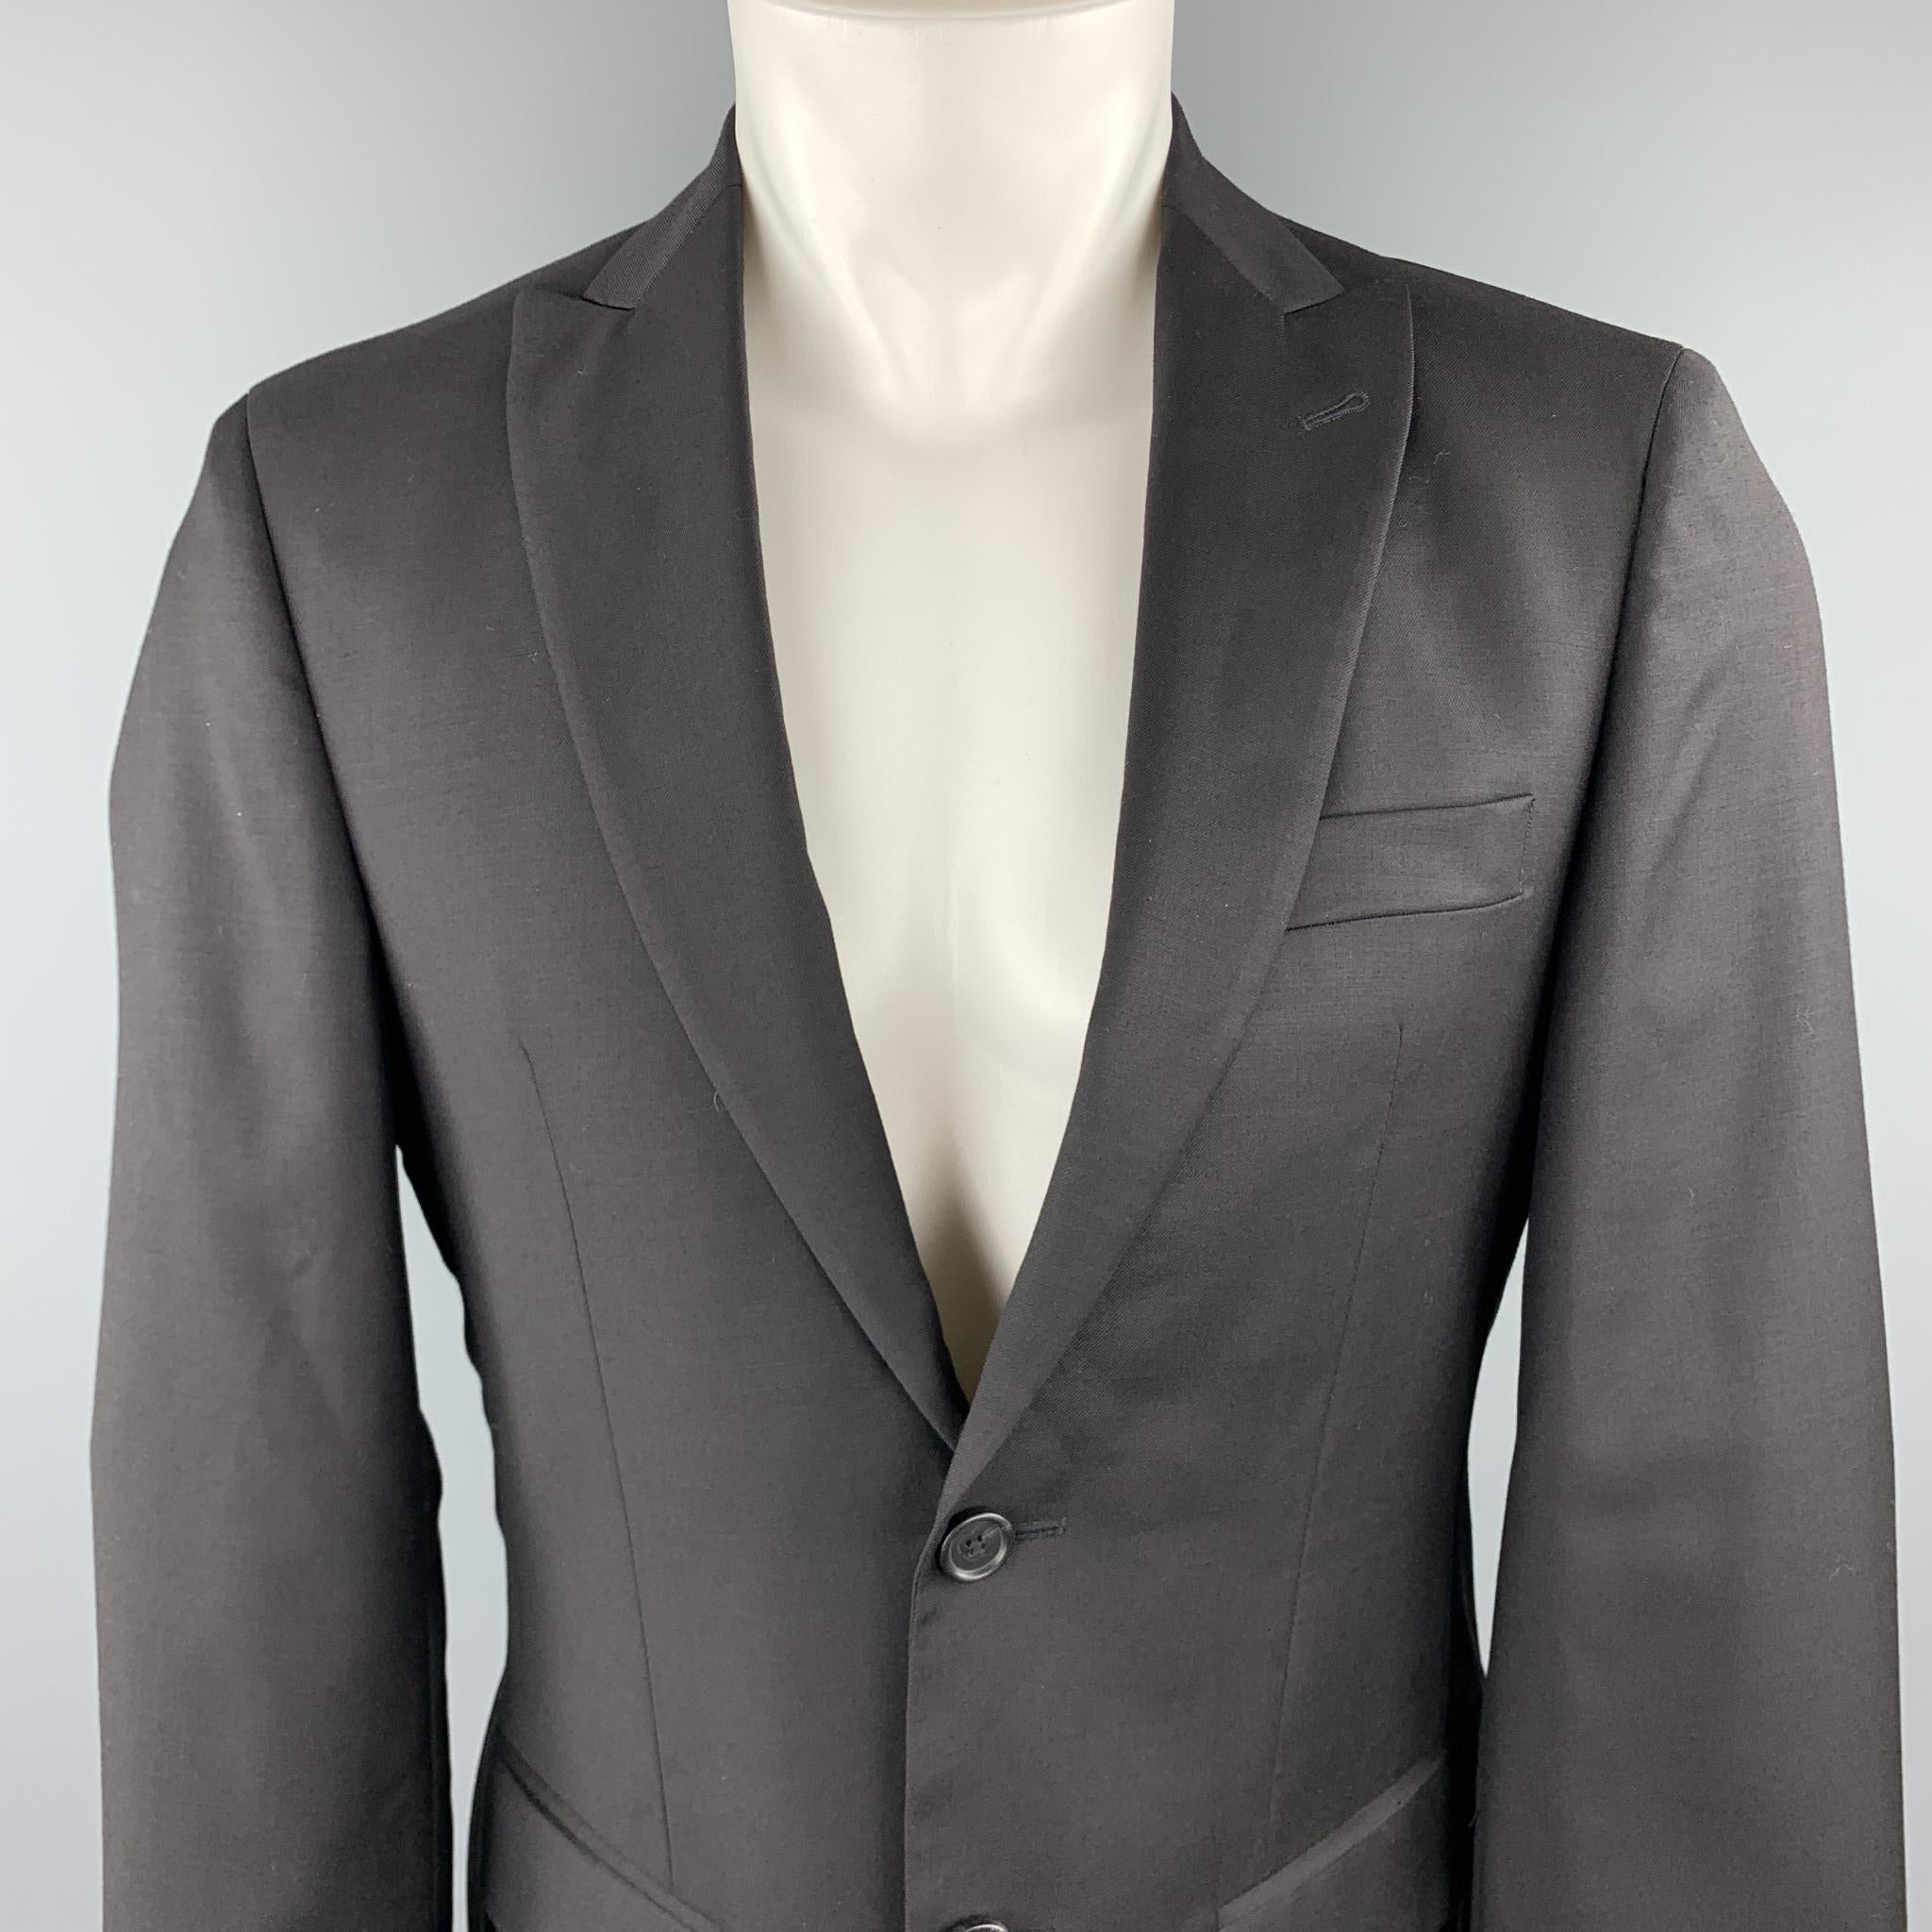 JOHN VARVATOS USA sport coat comes in black wool with a peak lapel, single breasted, two button front, and double vented back. 

Excellent Pre-Owned Condition. 
Marked: US 36

Measurements:

Shoulder: 17 in.
Chest: 40 in.
Sleeve: 24.5 in.
Length: 30